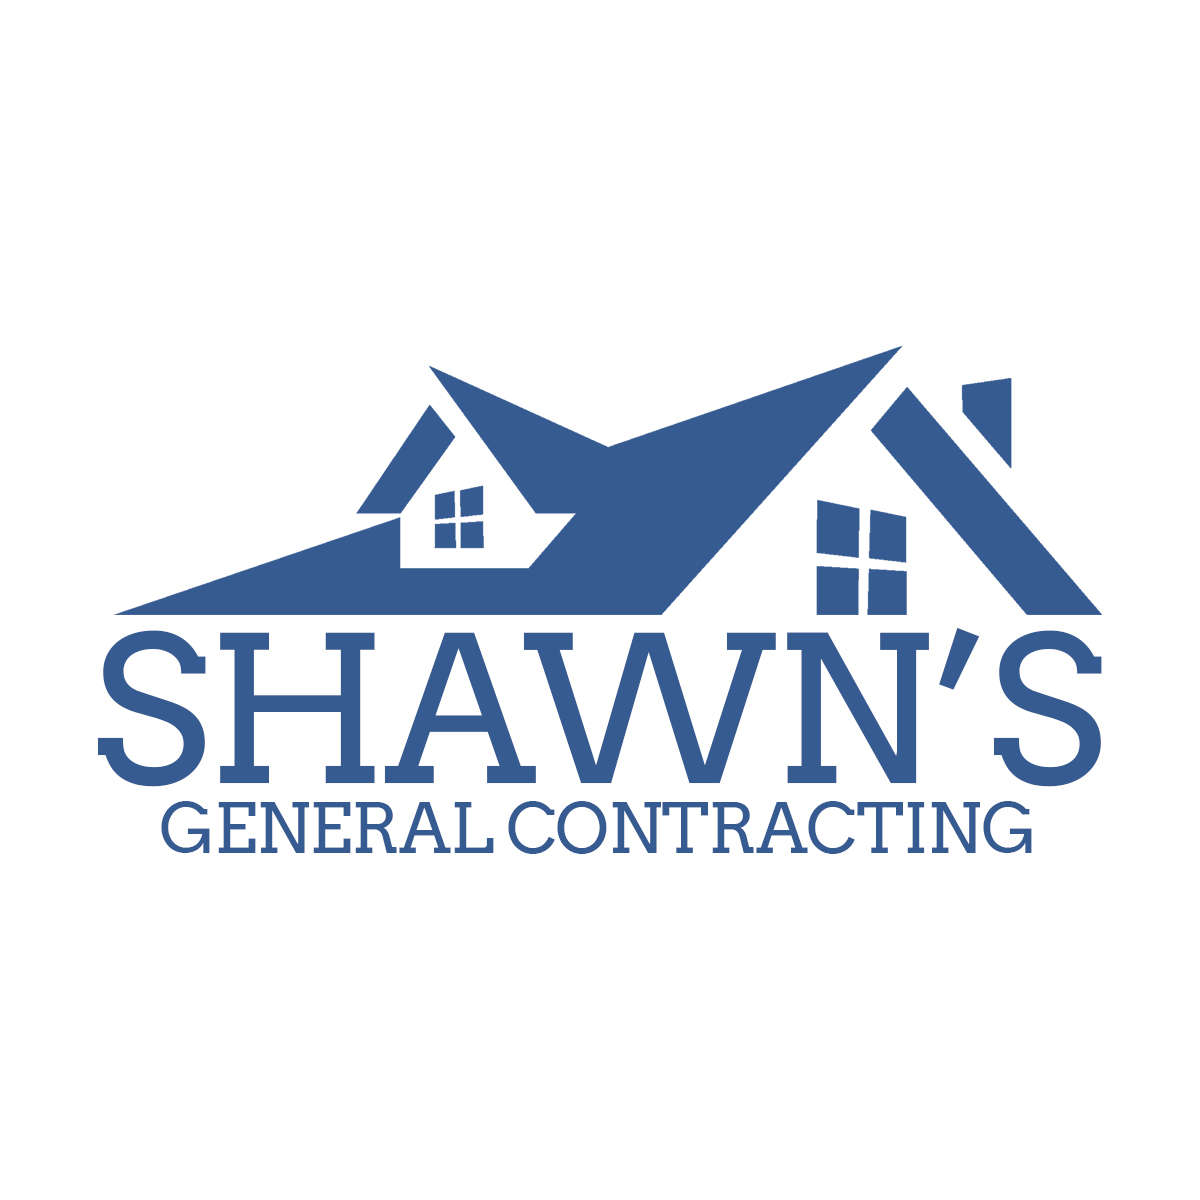 Shawn's General Contracting Logo